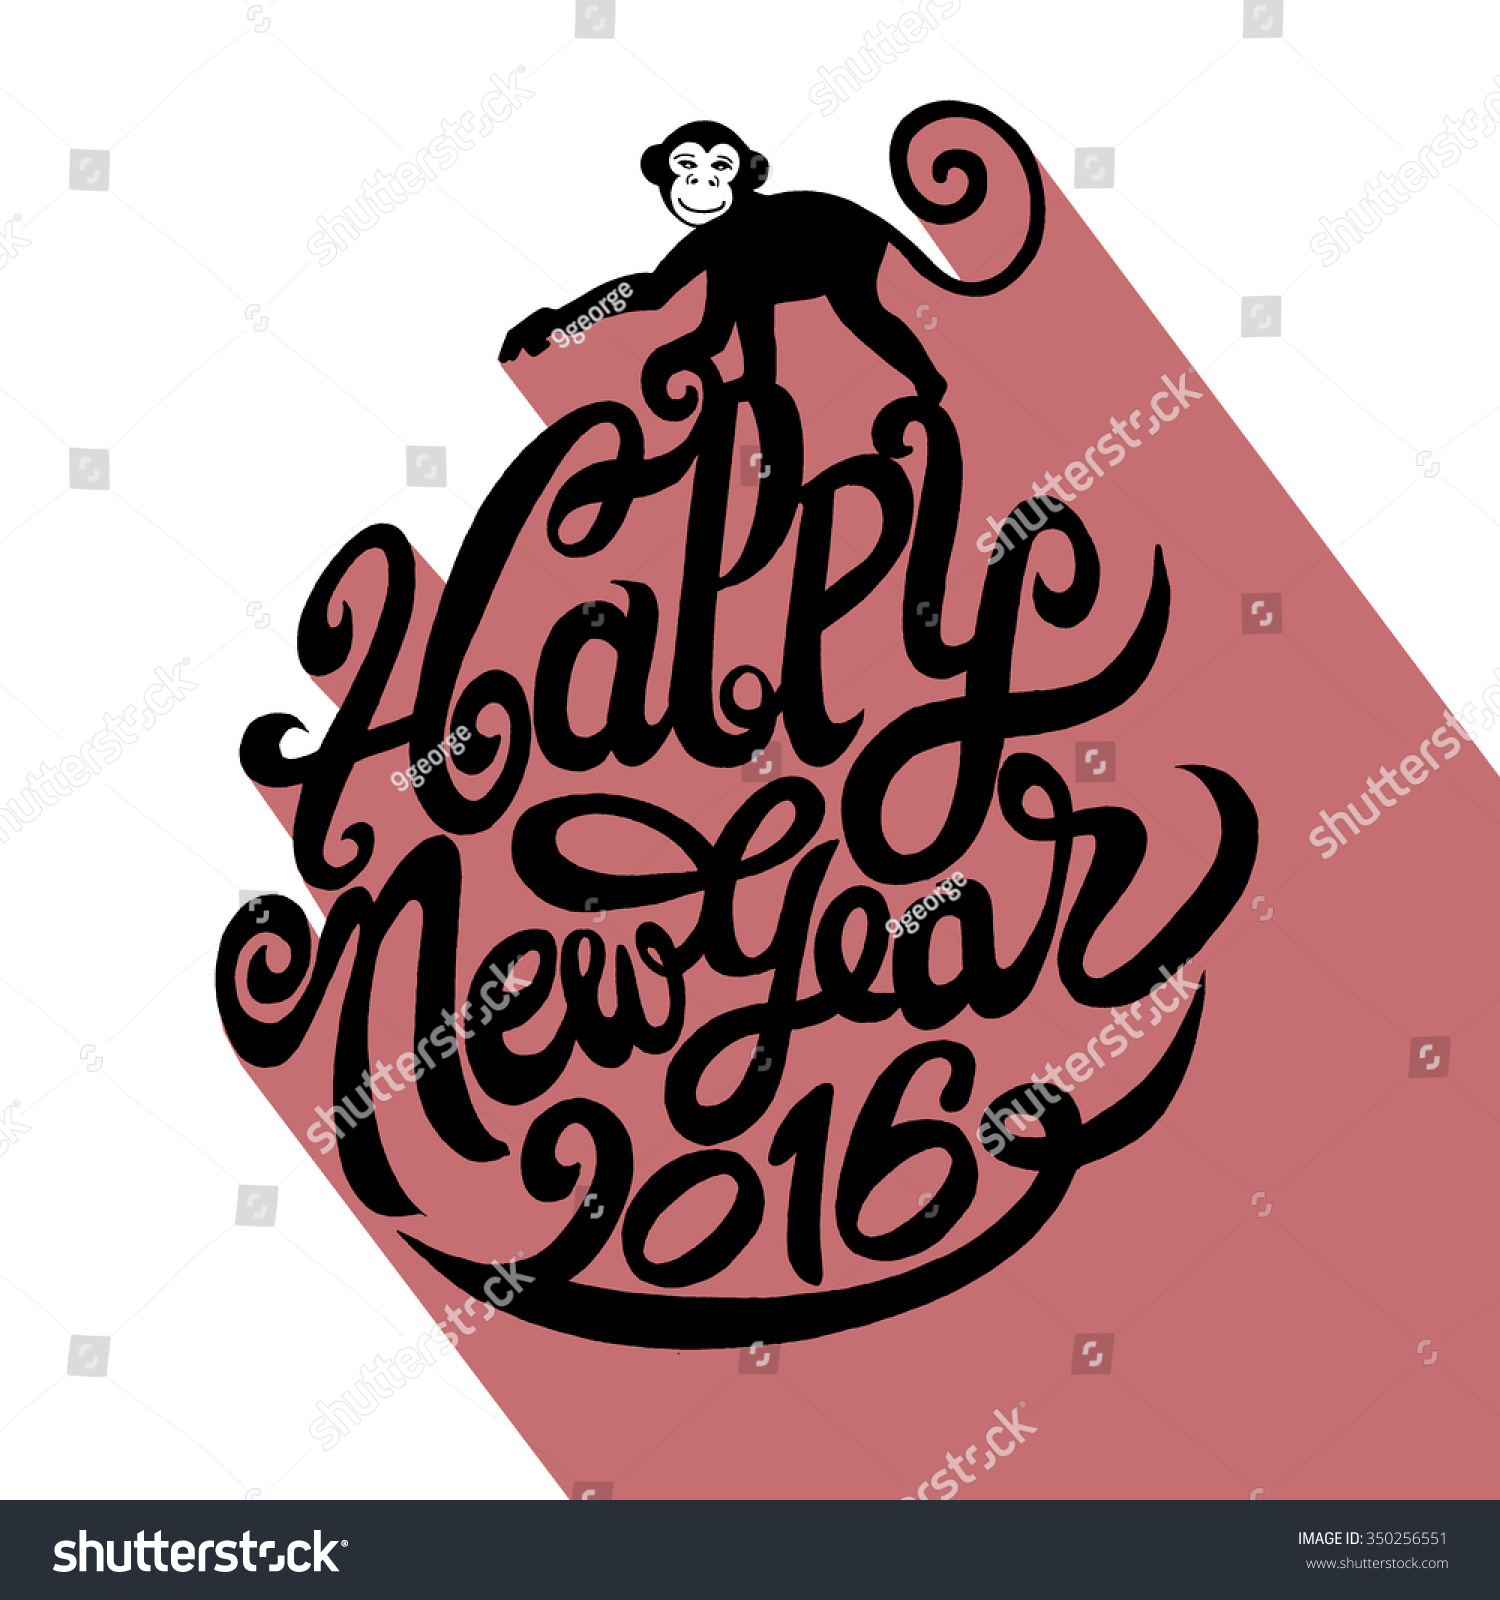 Hand Drawing Doodle Of Happy New Year. Vector Illustration. - 350256551